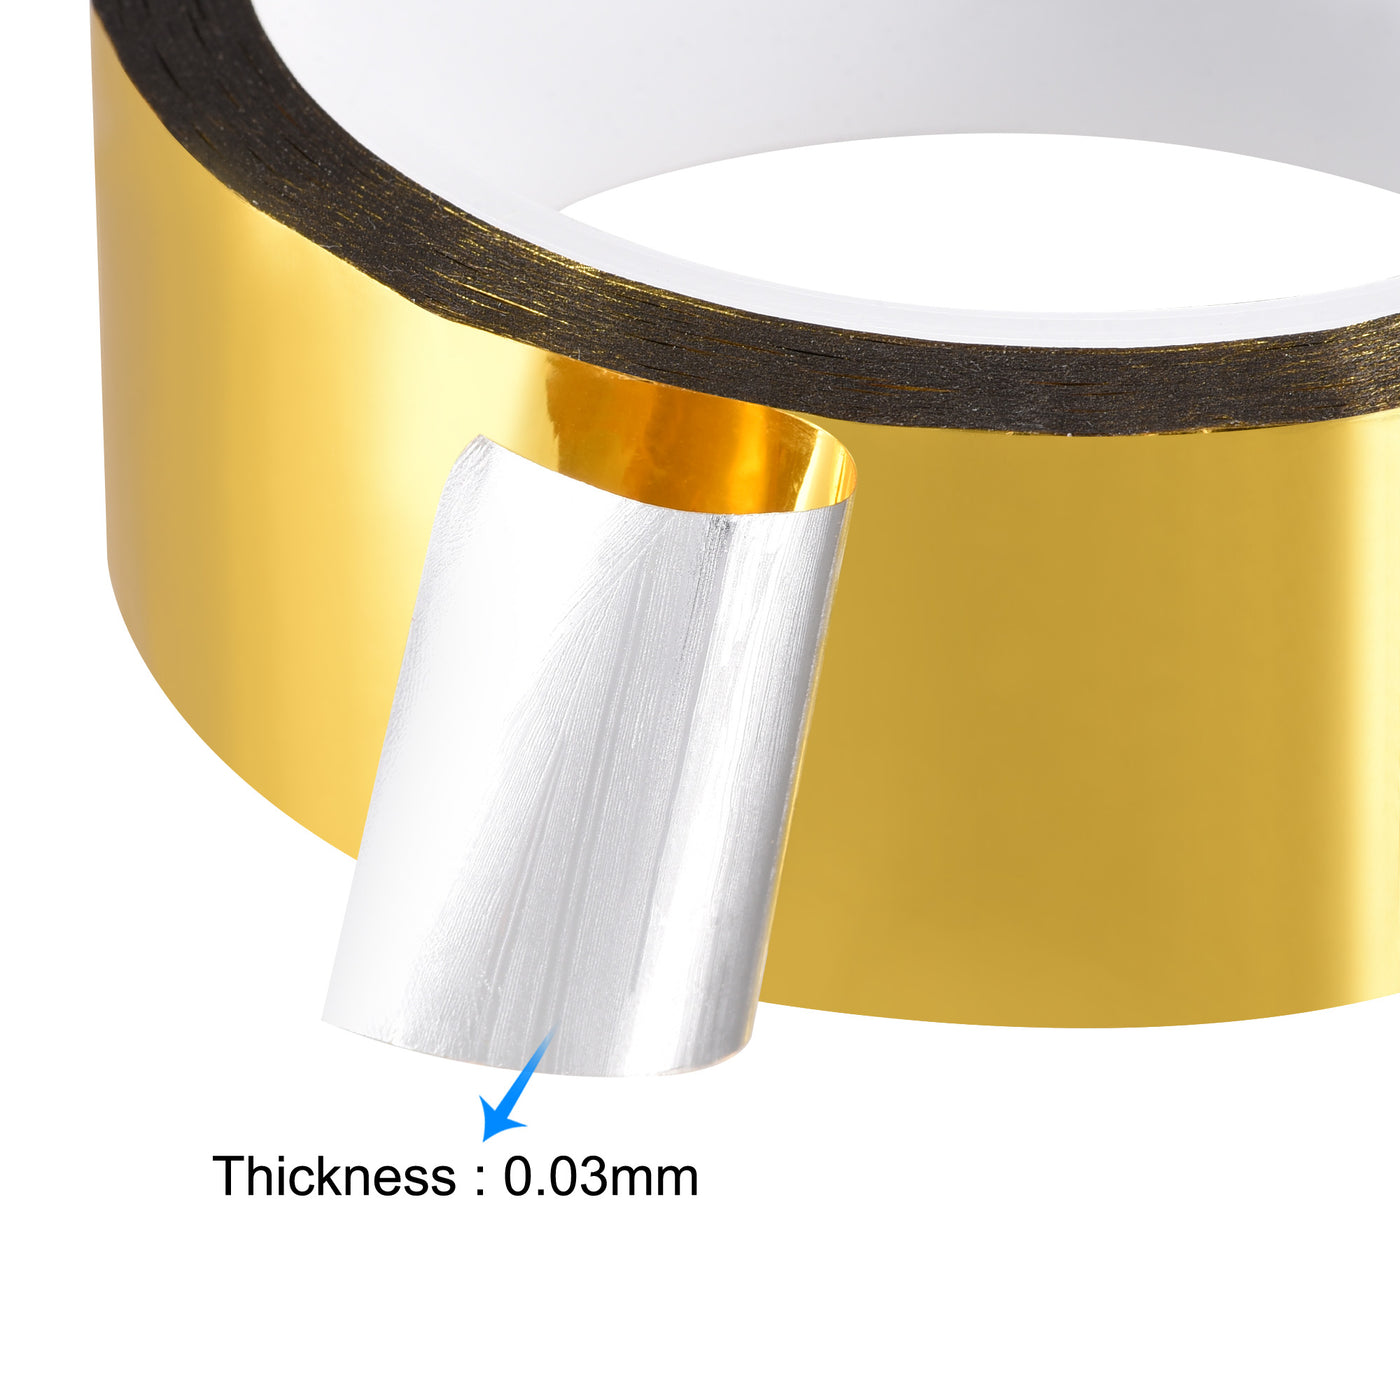 uxcell Uxcell Gold Tone Metalized Tape 60mm x 50m/164ft Decor Tape for Graphic Arts